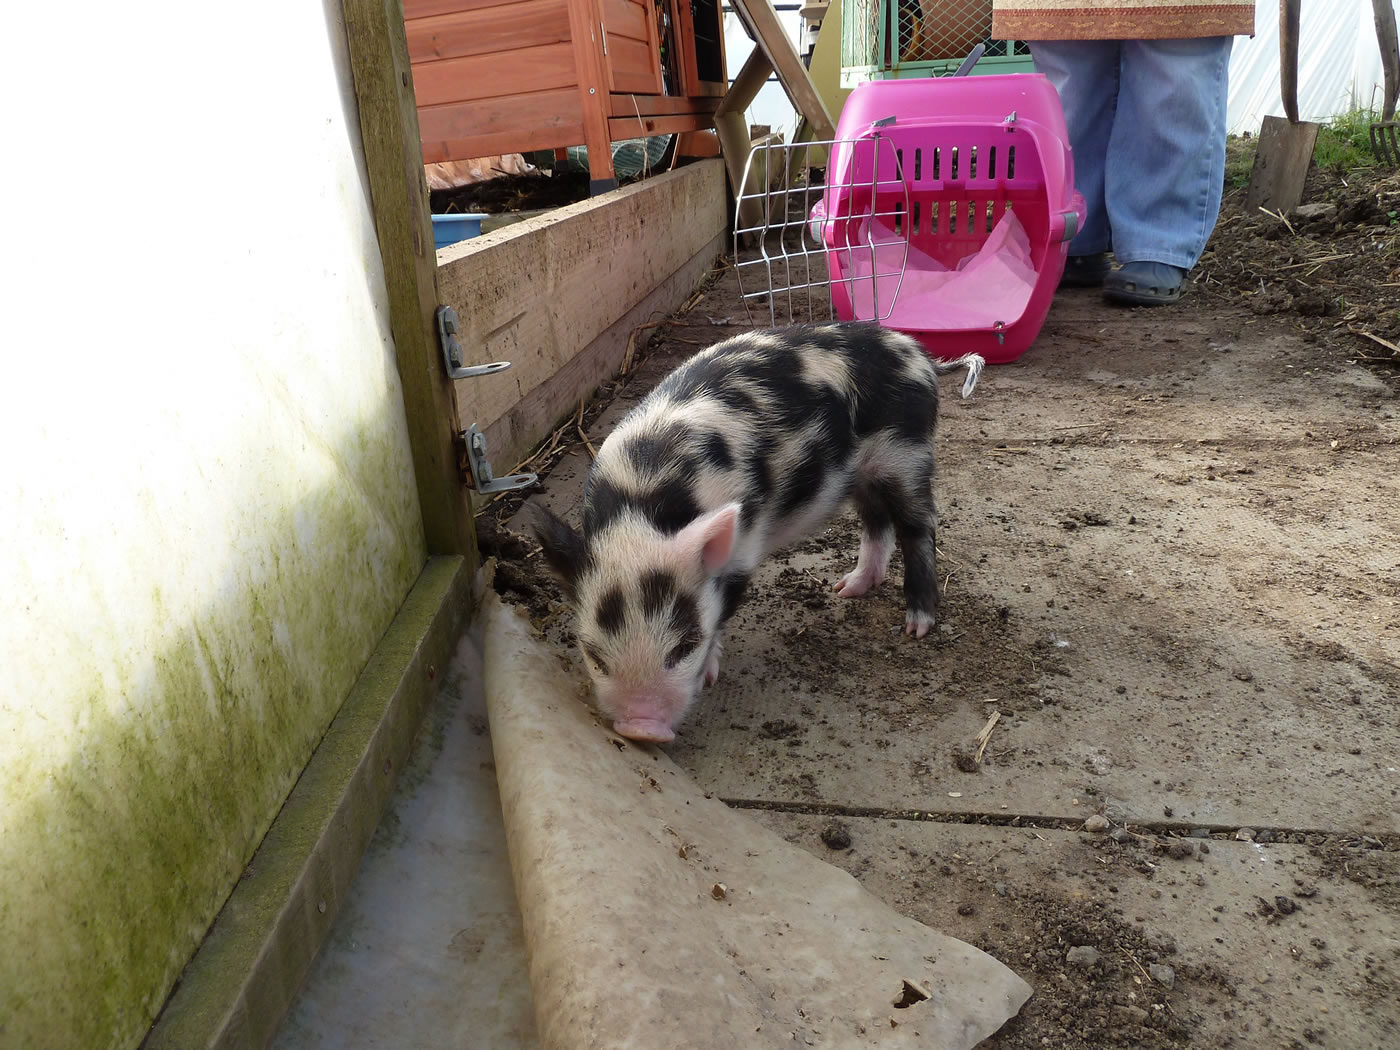 Picture of 15 day old Pet Kunekune pig outside on the croft.